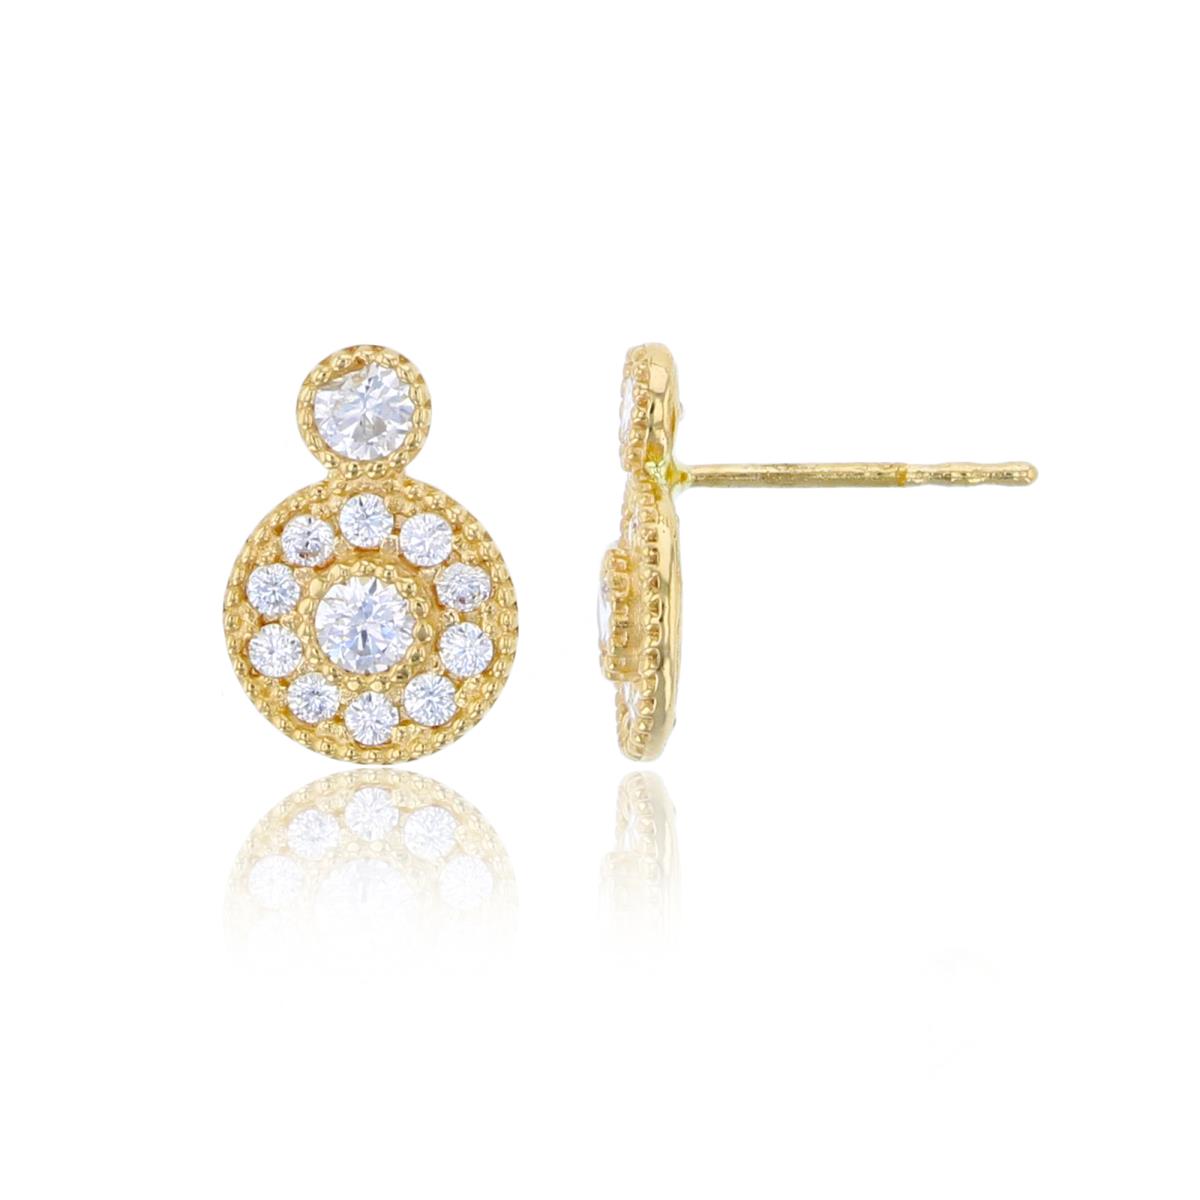 14K Yellow Gold 10x7mm Micropave CZ Milgrain Double Circle Stud Earring (No Back)